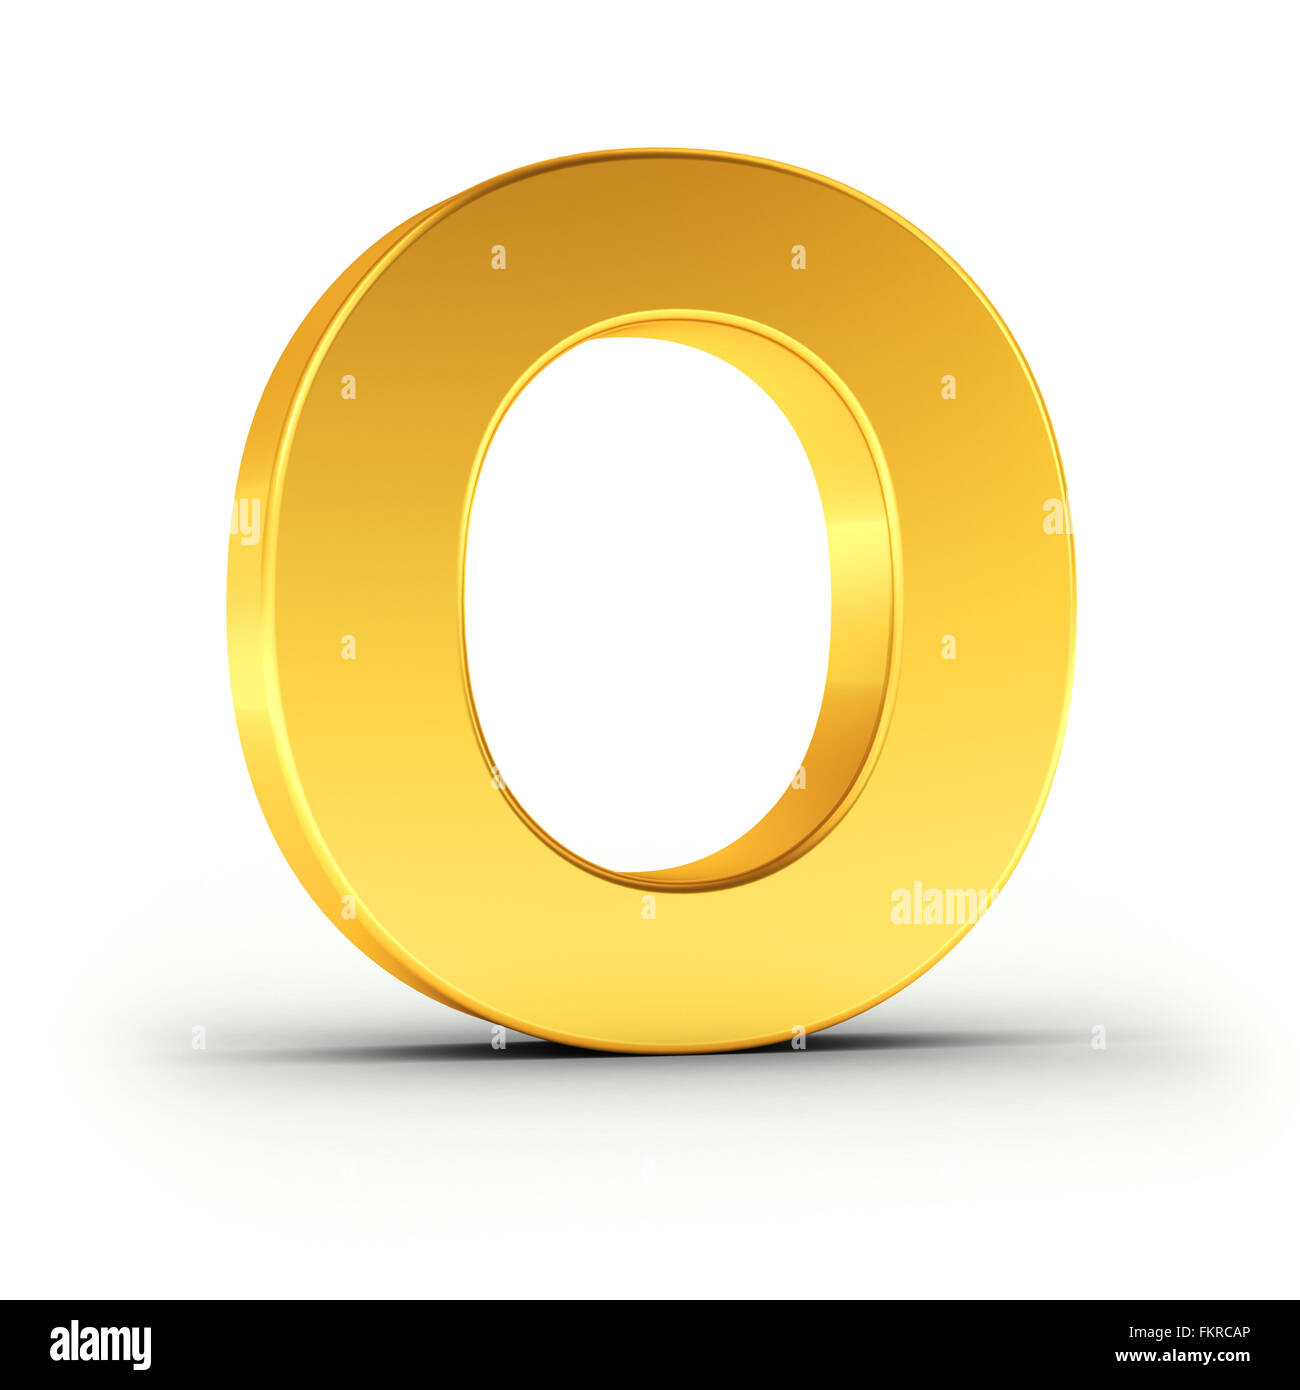 The Letter O as a polished golden object Stock Photo